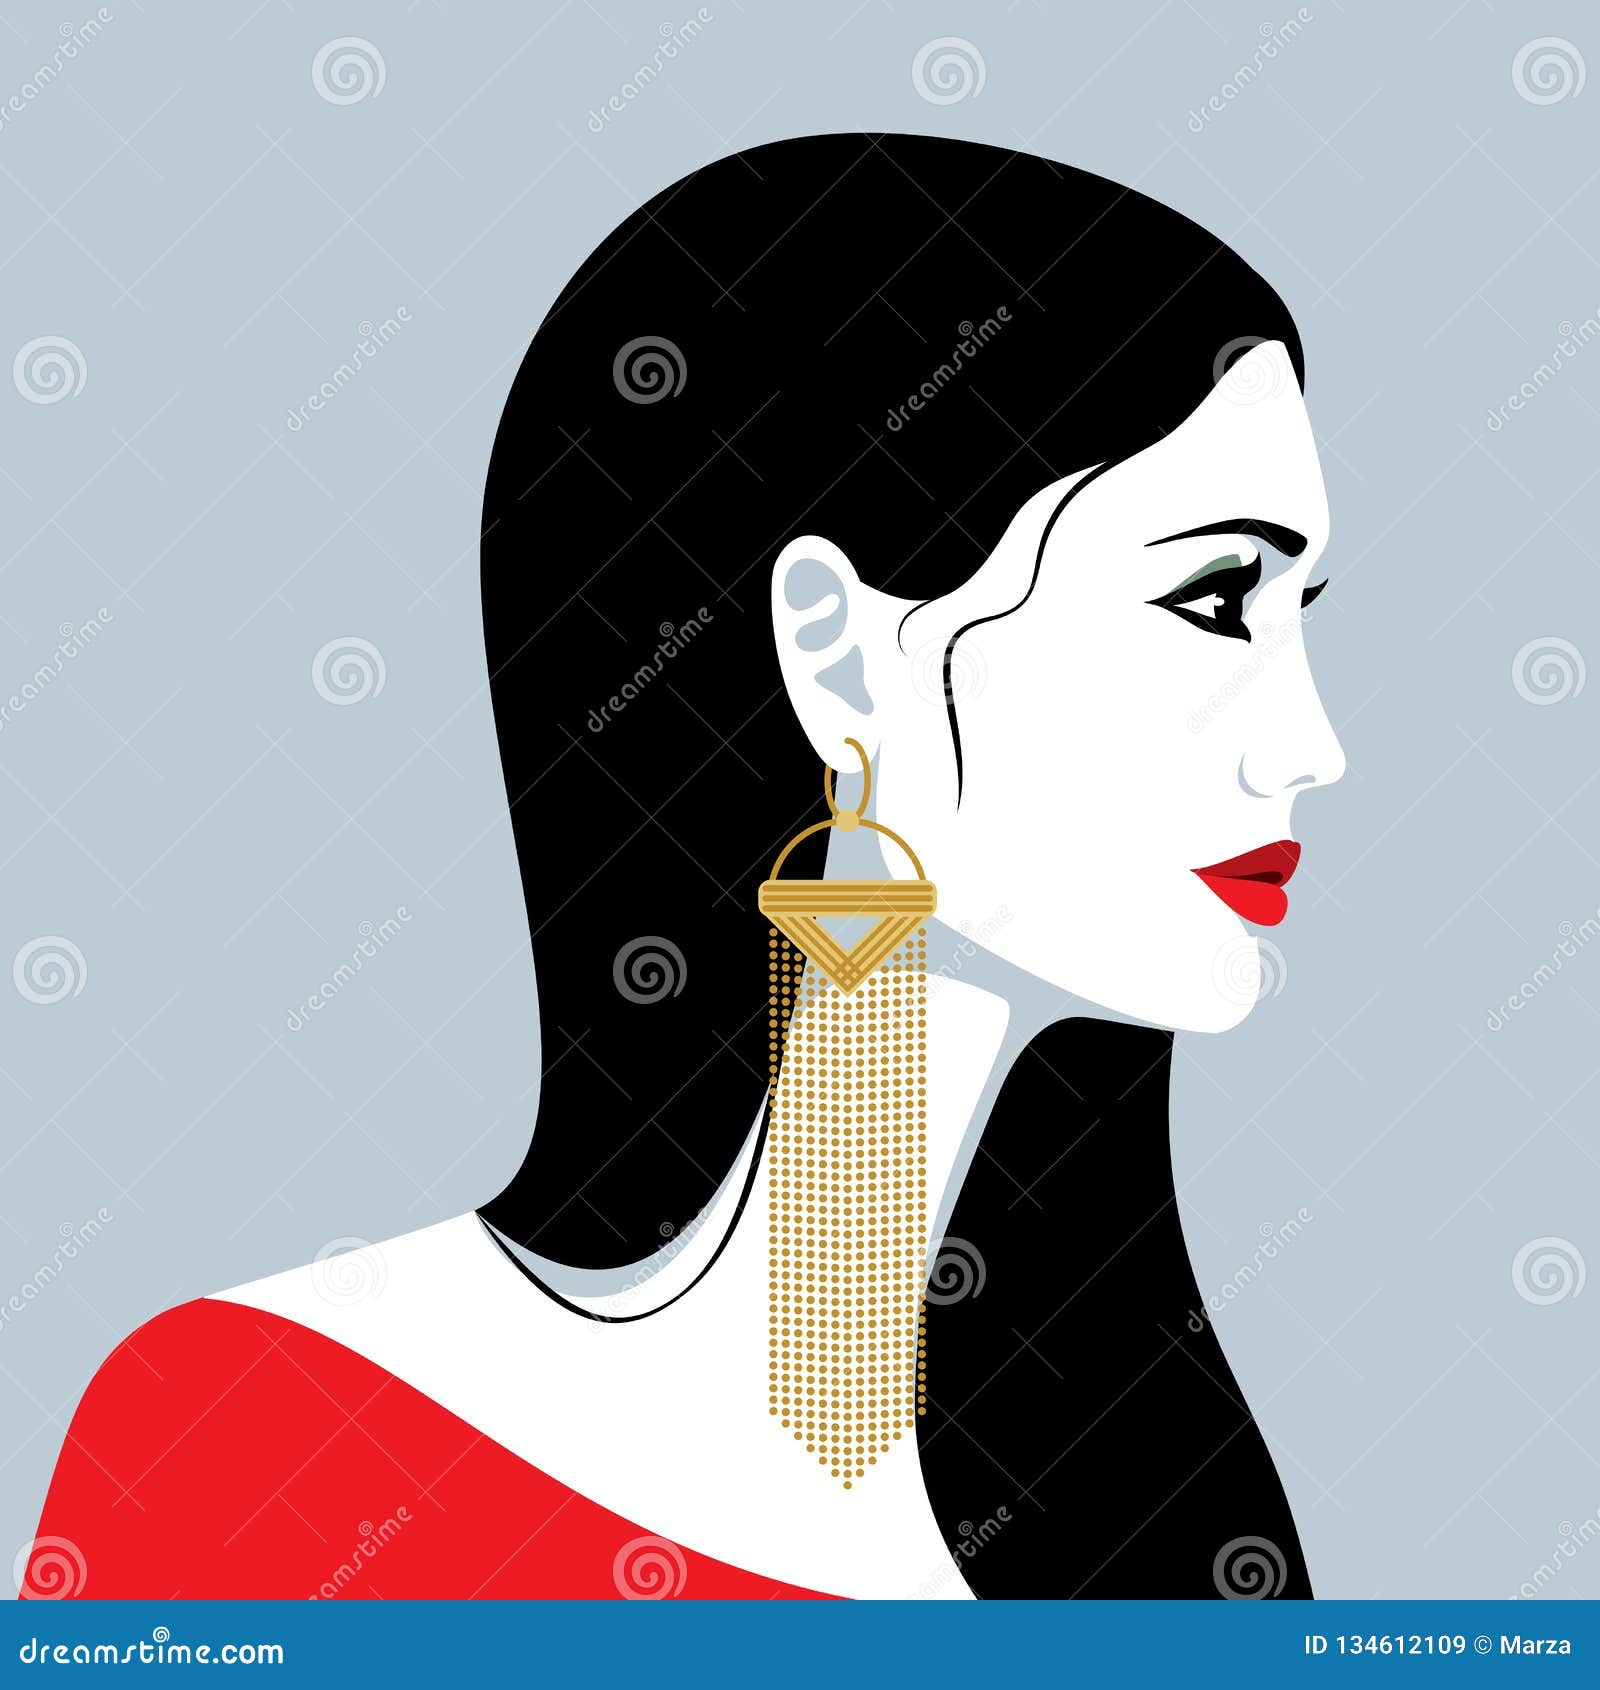 Beatiful Woman With Long Earring Stock Vector Illustration Of Glamour